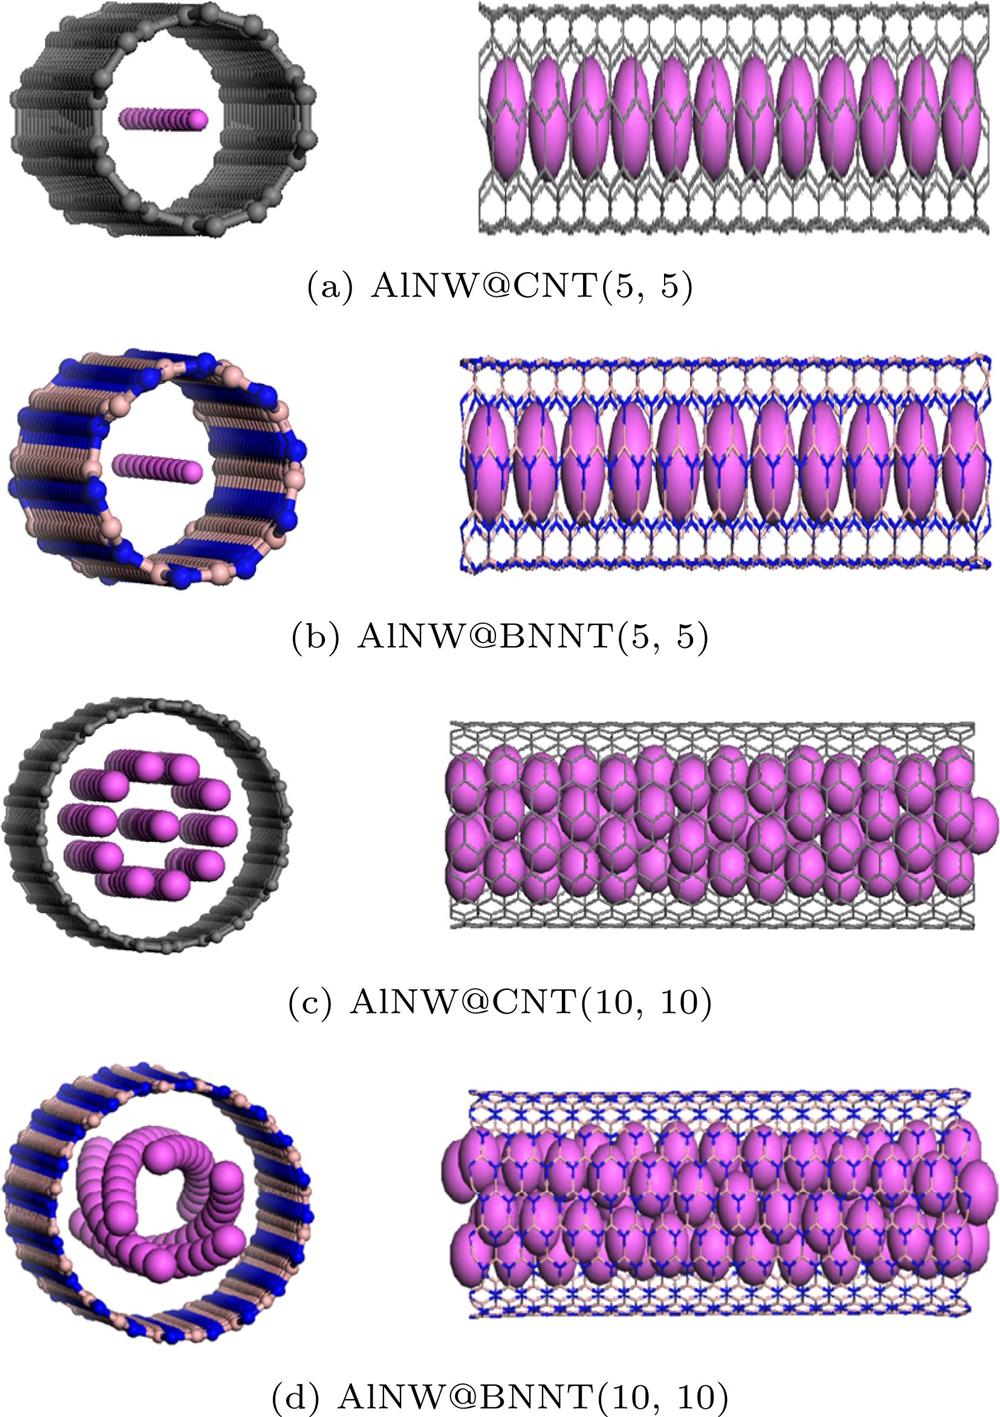 Structure of the optimized AlNW@CNT and AlNW@BNNT: (a) AlNW@CNT (5, 5); (b) AlNW@BNNT (5, 5); (c) AlNW@CNT (10, 10); (d) AlNW@BNNT (10, 10).优化后的AlNW@CNT和AlNW@BNNT复合结构 (a) AlNW@CNT (5, 5); (b) AlNW@BNNT (5, 5); (c) AlNW@CNT (10, 10); (d) AlNW@BNNT (10, 10)